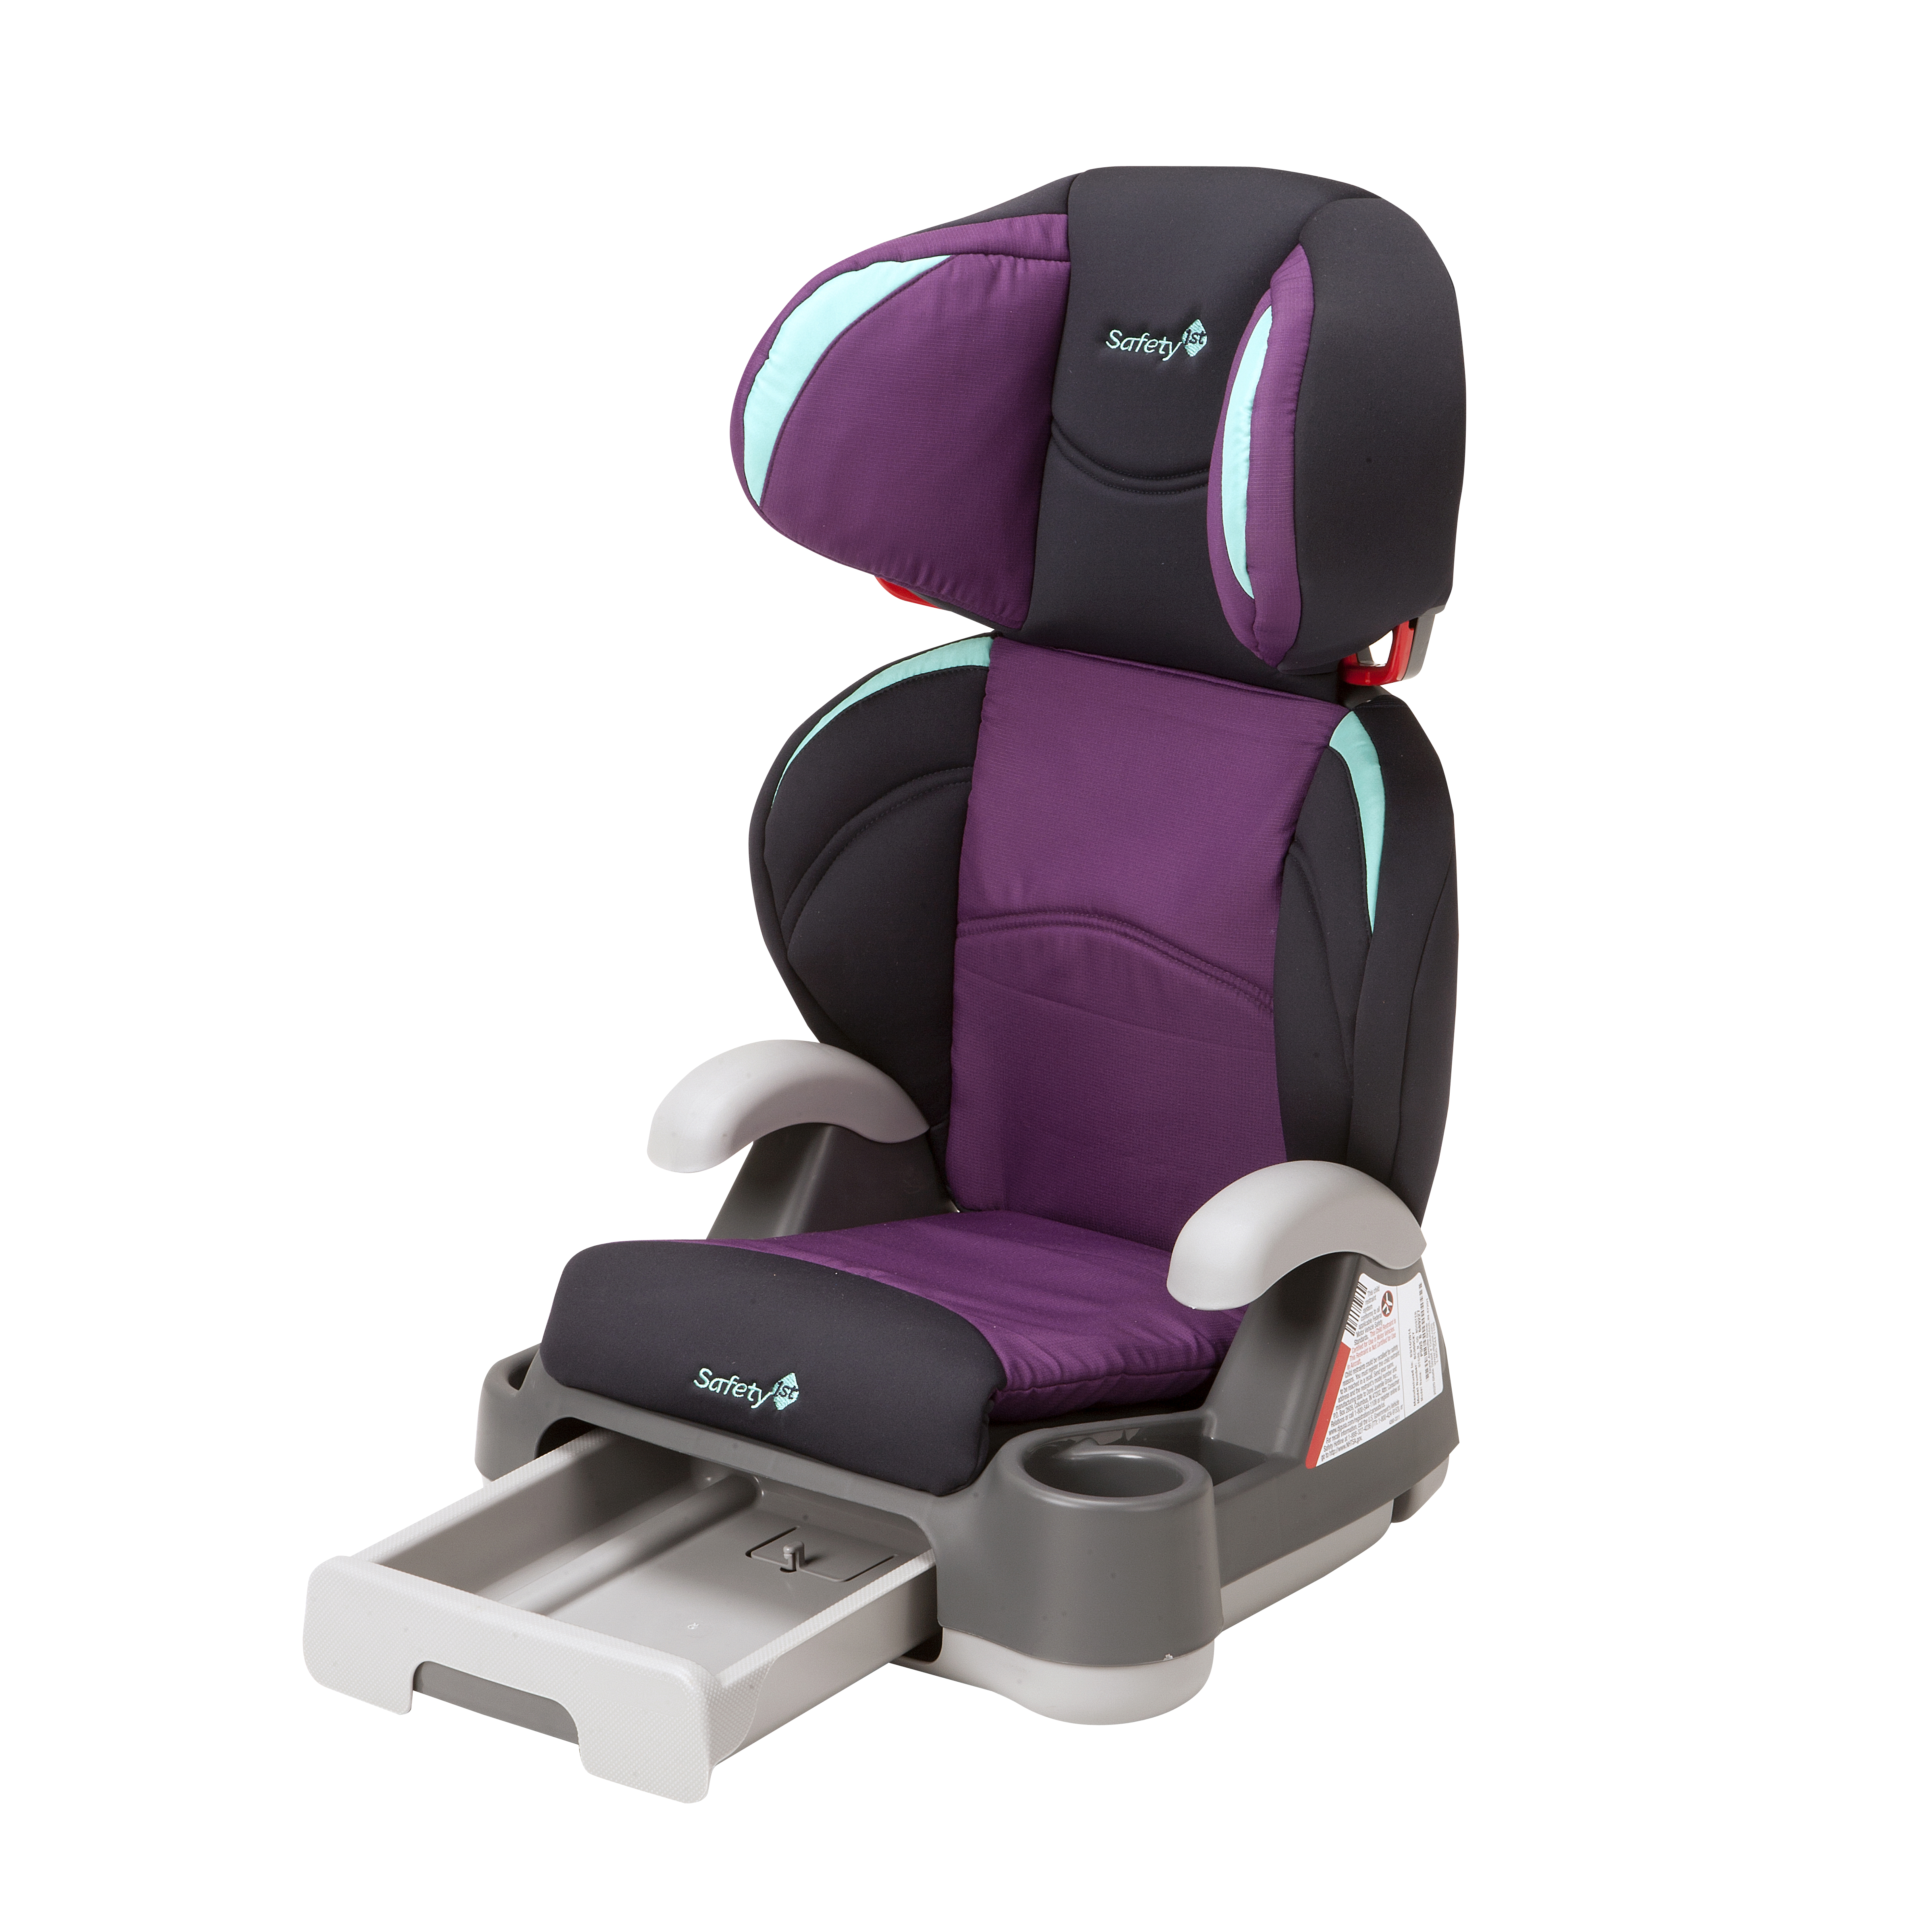 Safety 1st Backed Store 'n Go Booster Car Seat- Plumtastic